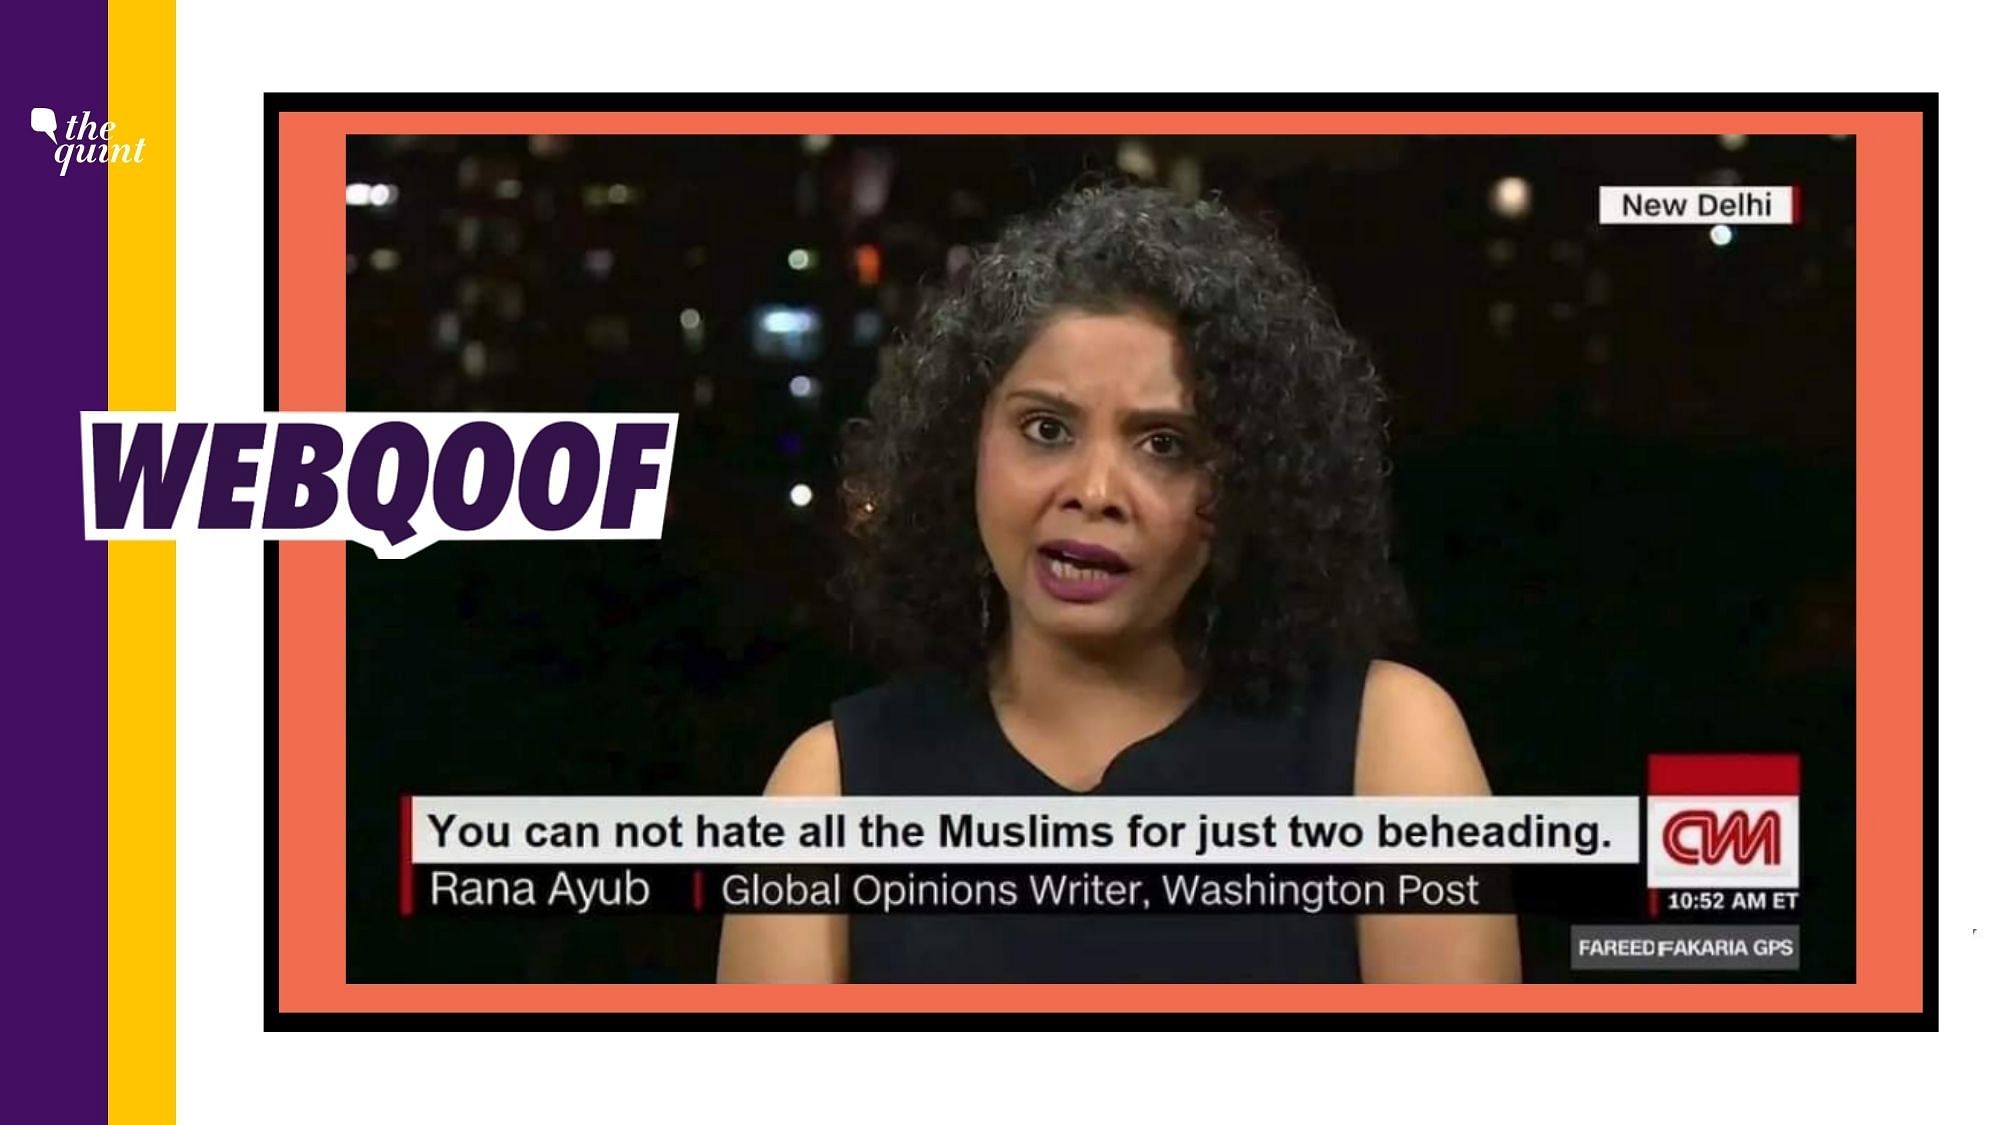 A morphed version of an old CNN interview of Rana Ayyub is being shared to make false claims about her regarding the beheading in Paris.